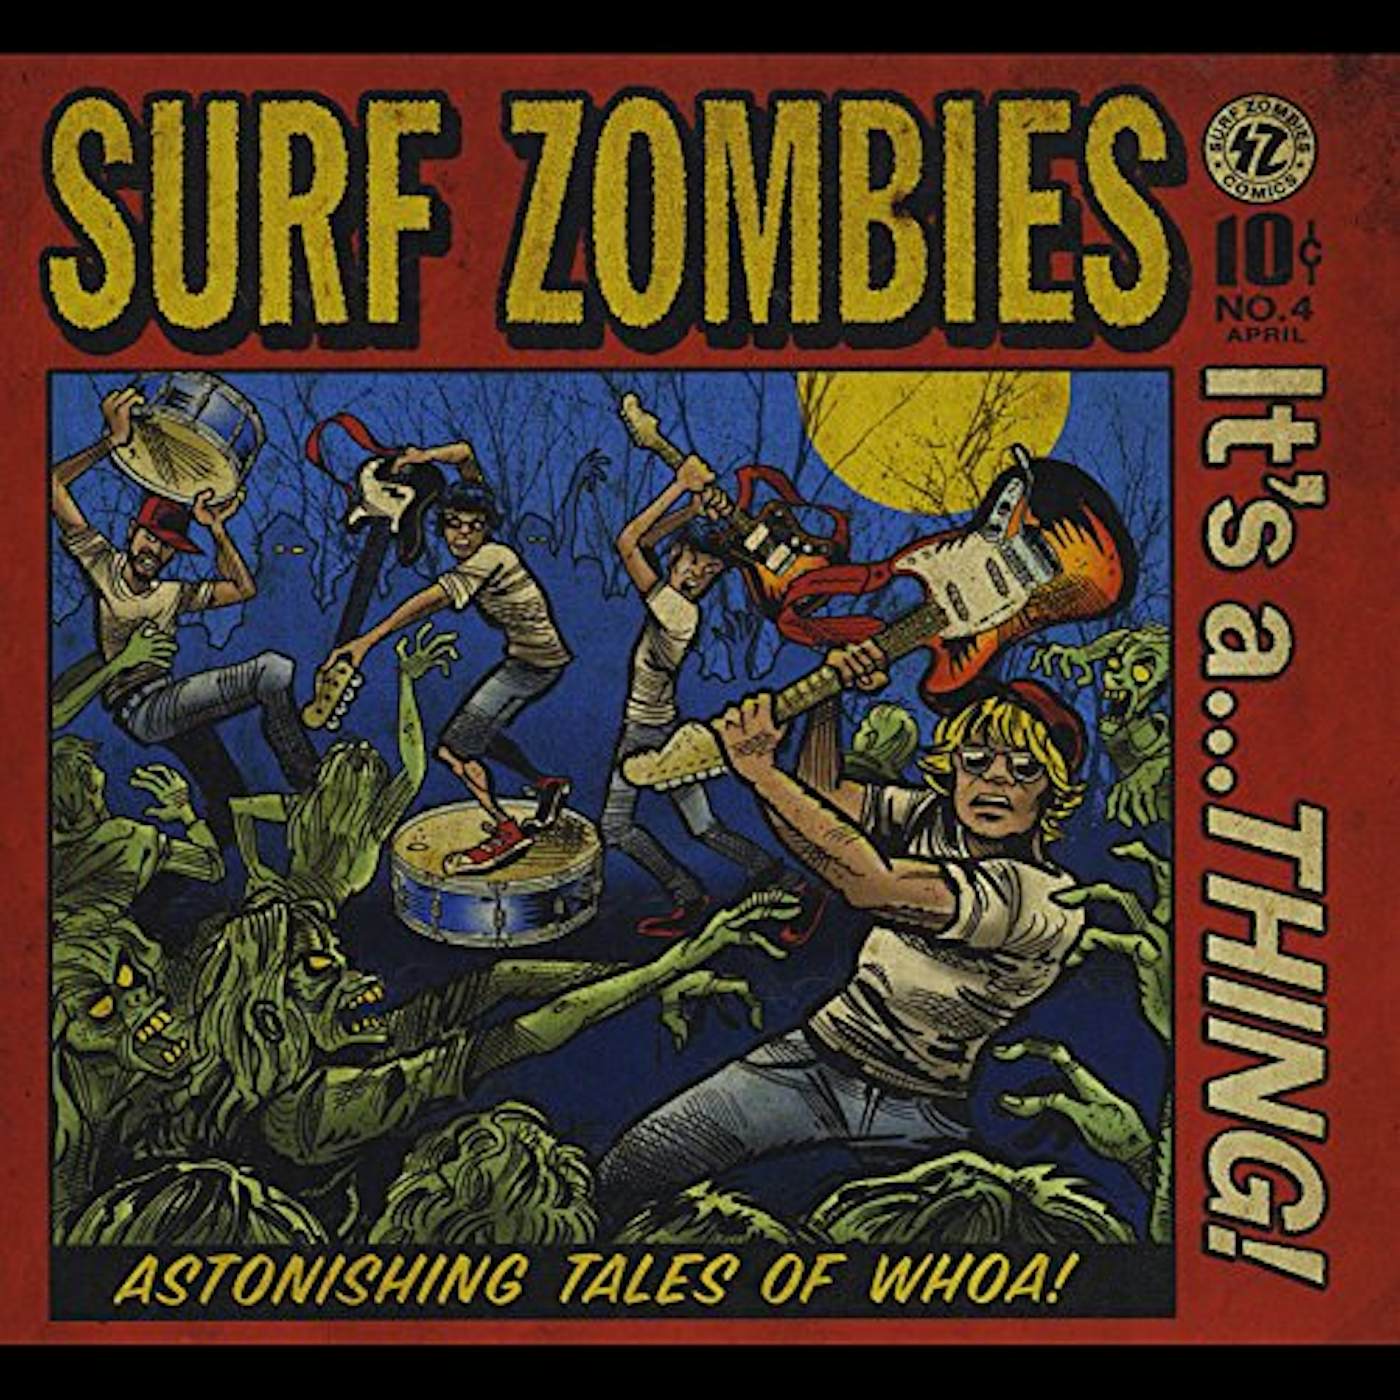 The Surf Zombies IT'S A THING Vinyl Record